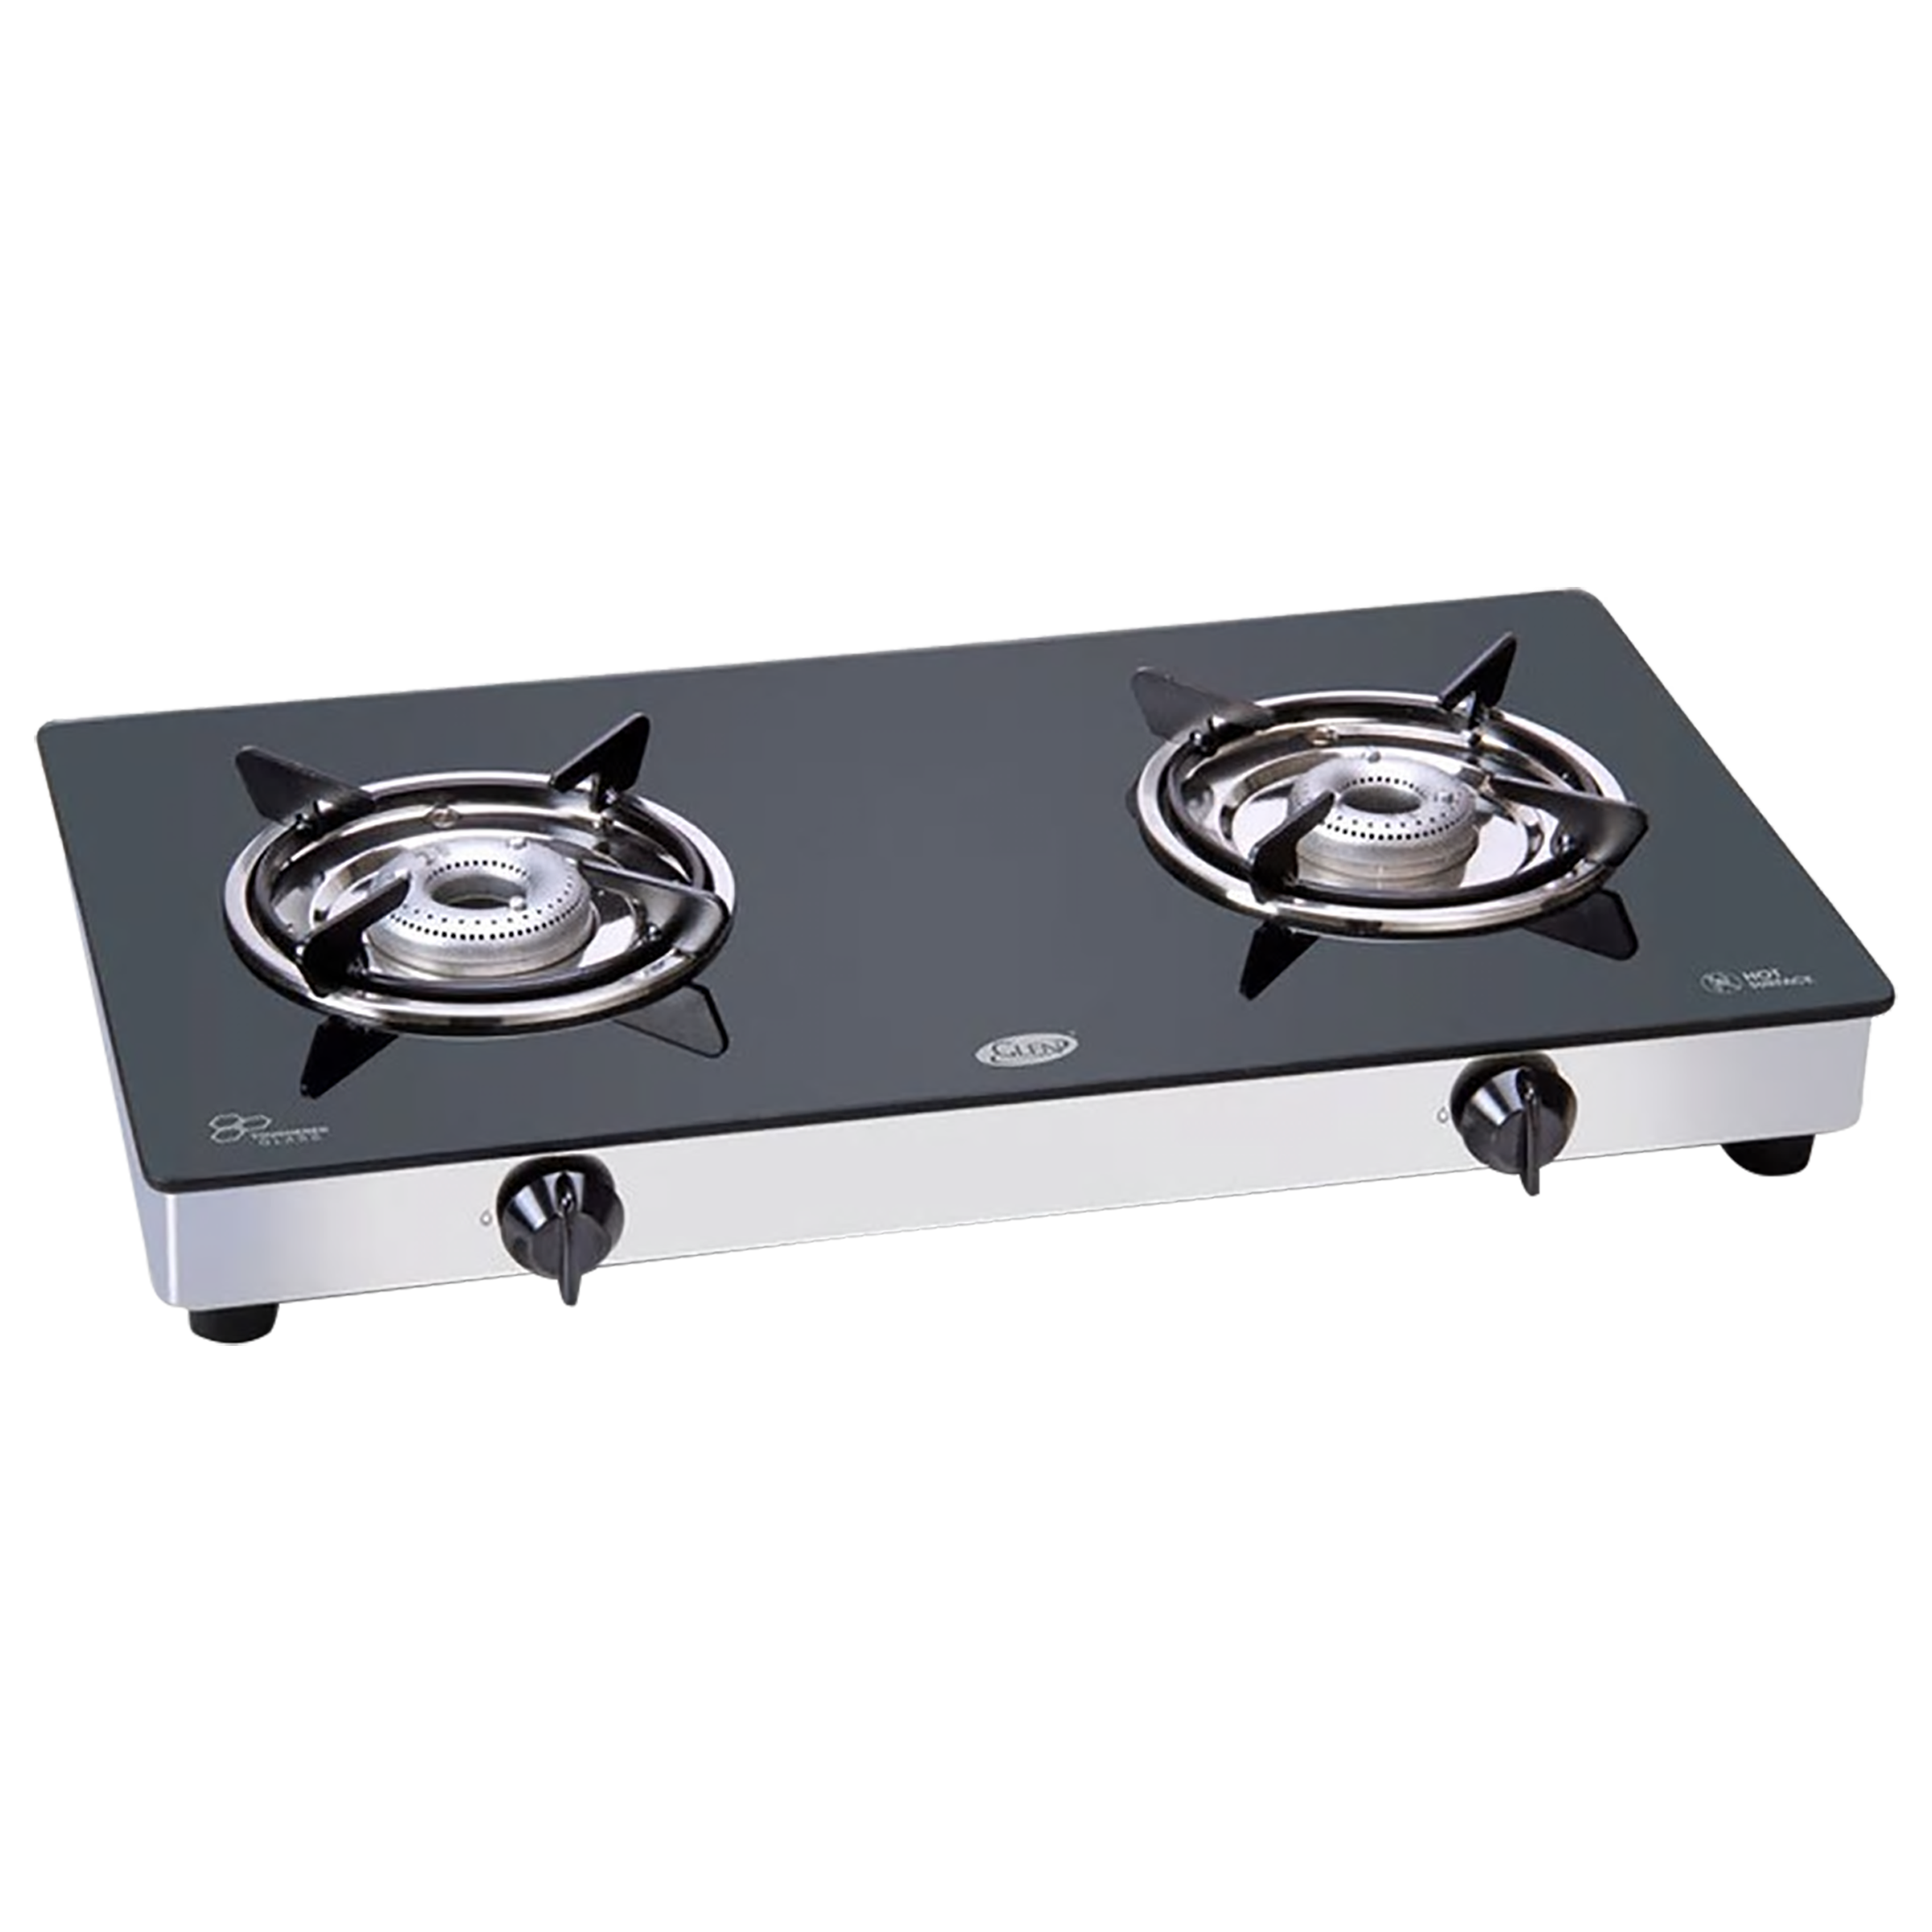 Glen CT1020GT 2 Burner Toughened Glass Top Gas Stove (Stainless Steel Drip Tray, Black)_1